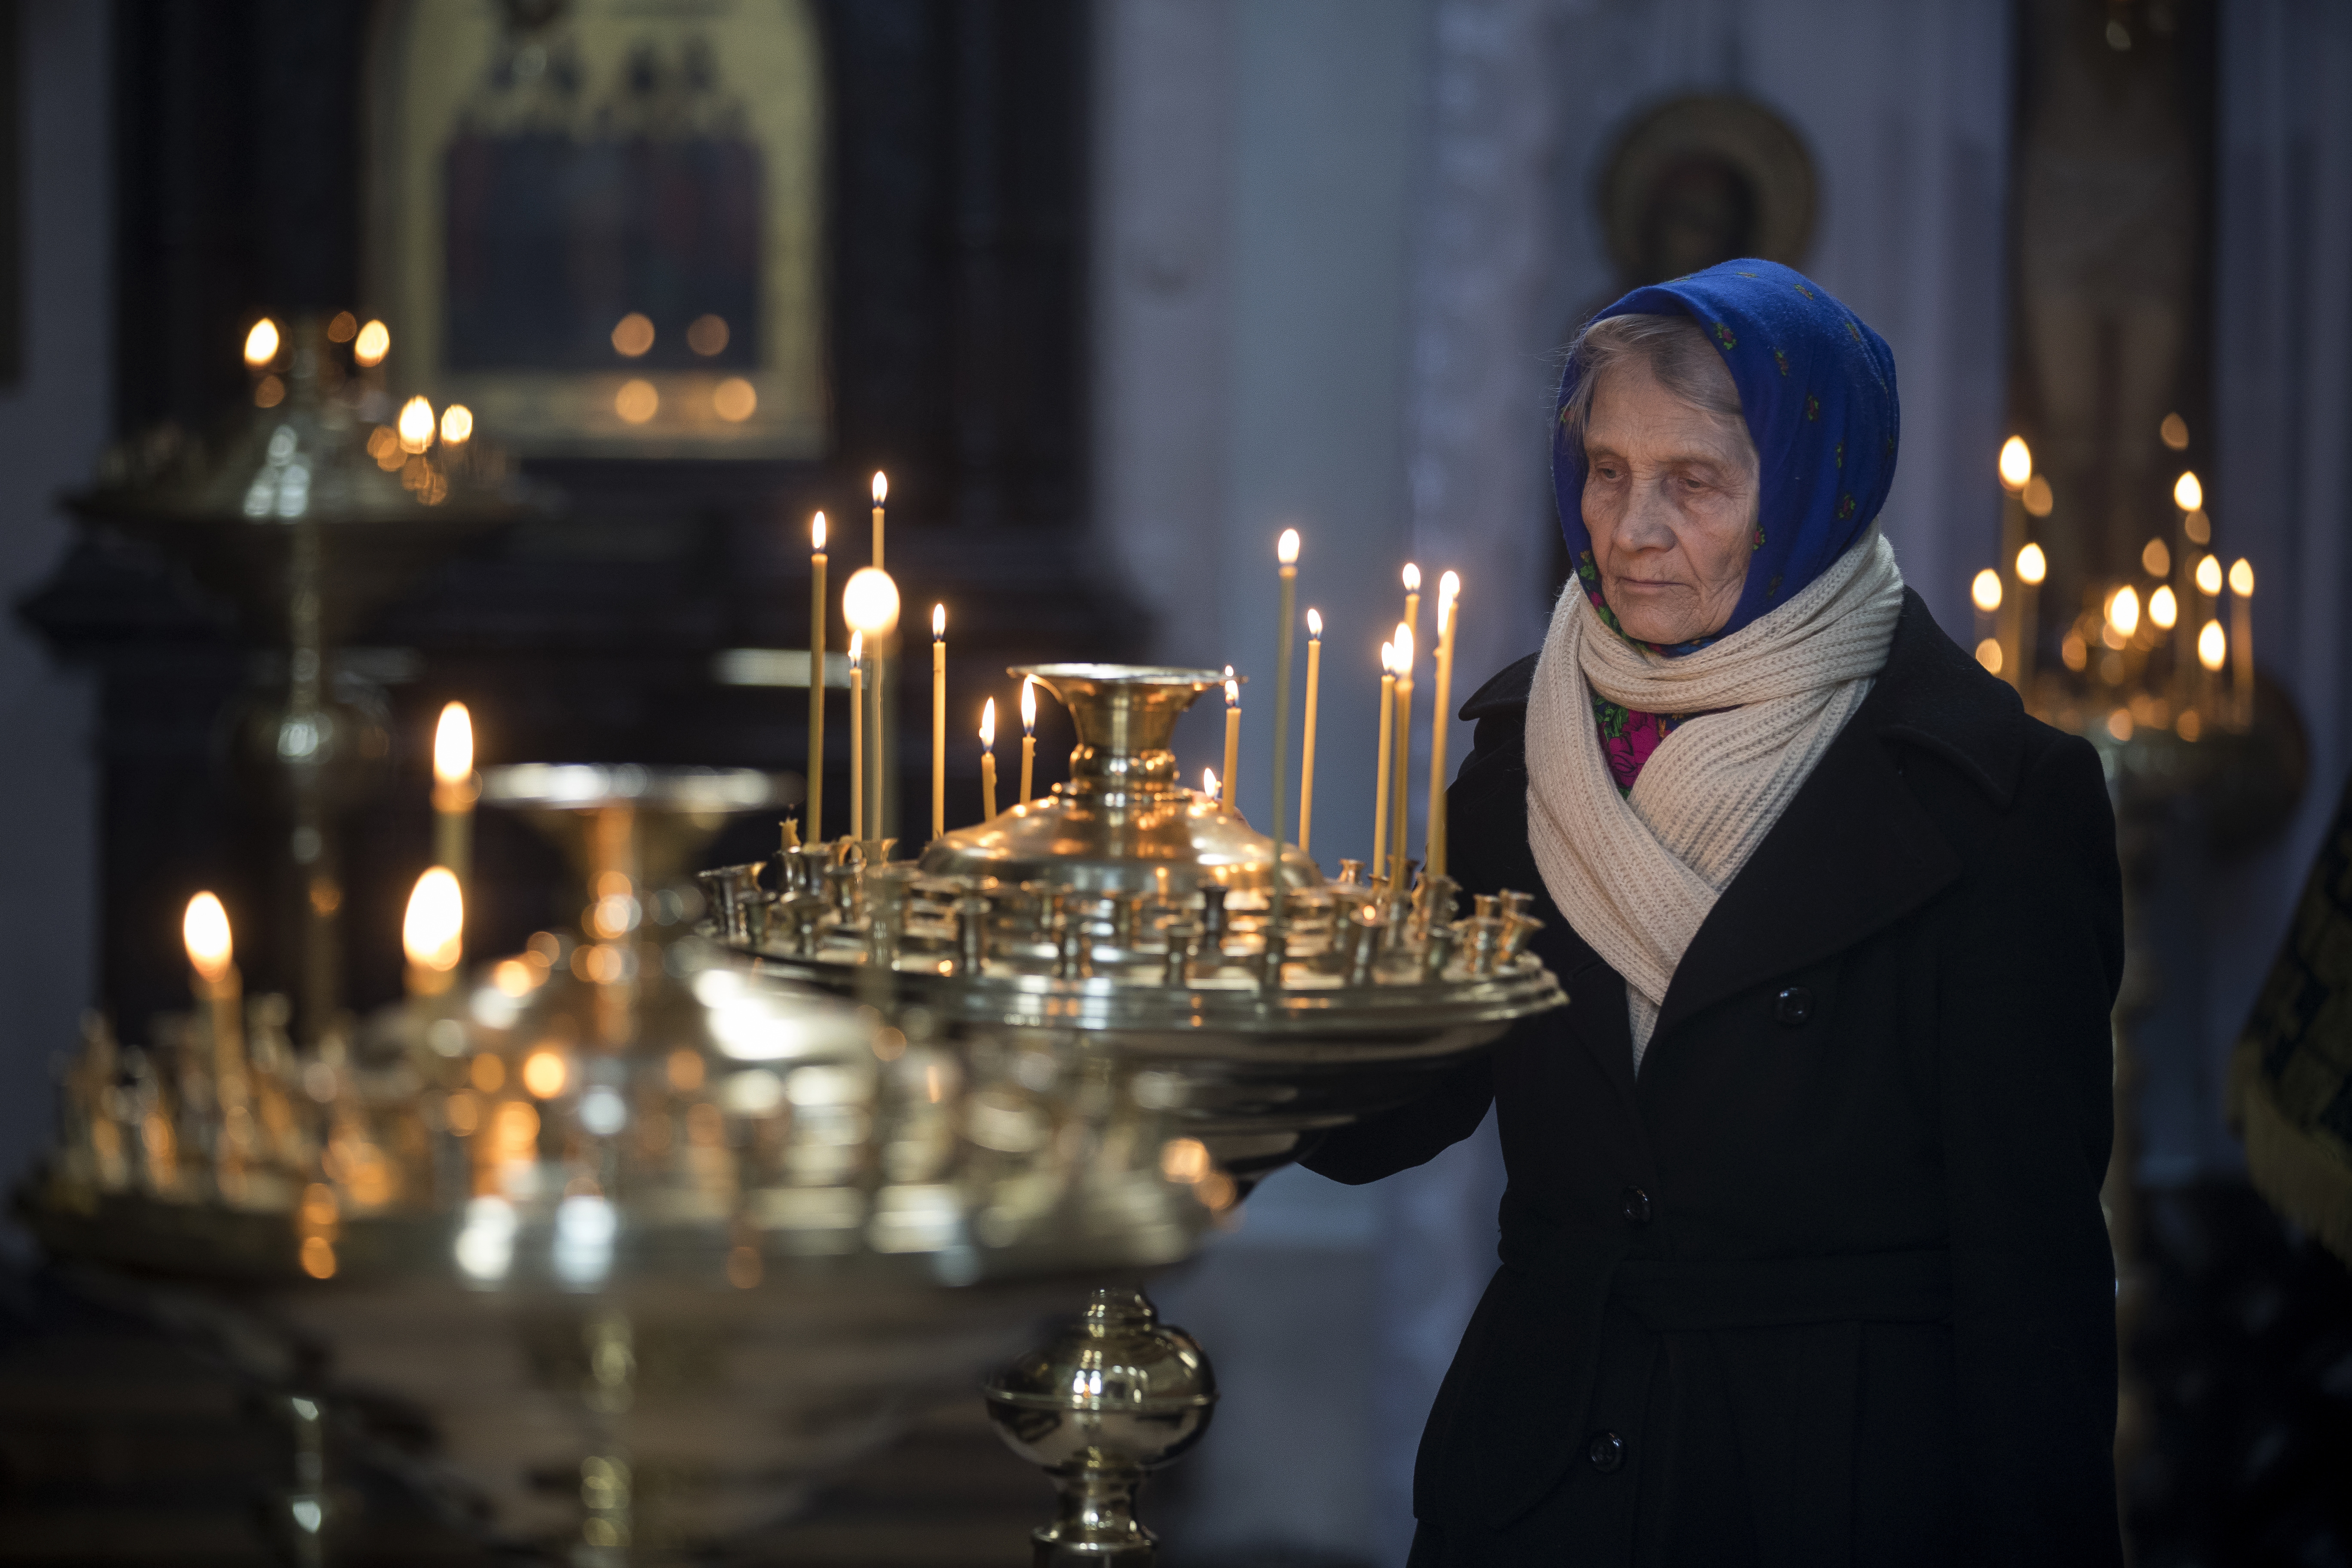 A woman lights a candle during a Good Friday Mass, at the Prechistensky, the Cathedral Palace in Vilnius, Lithuania, Friday, April 6, 2018. Orthodox Christians around the world celebrate Easter on Sunday, April 8.(AP Photo/Mindaugas Kulbis)